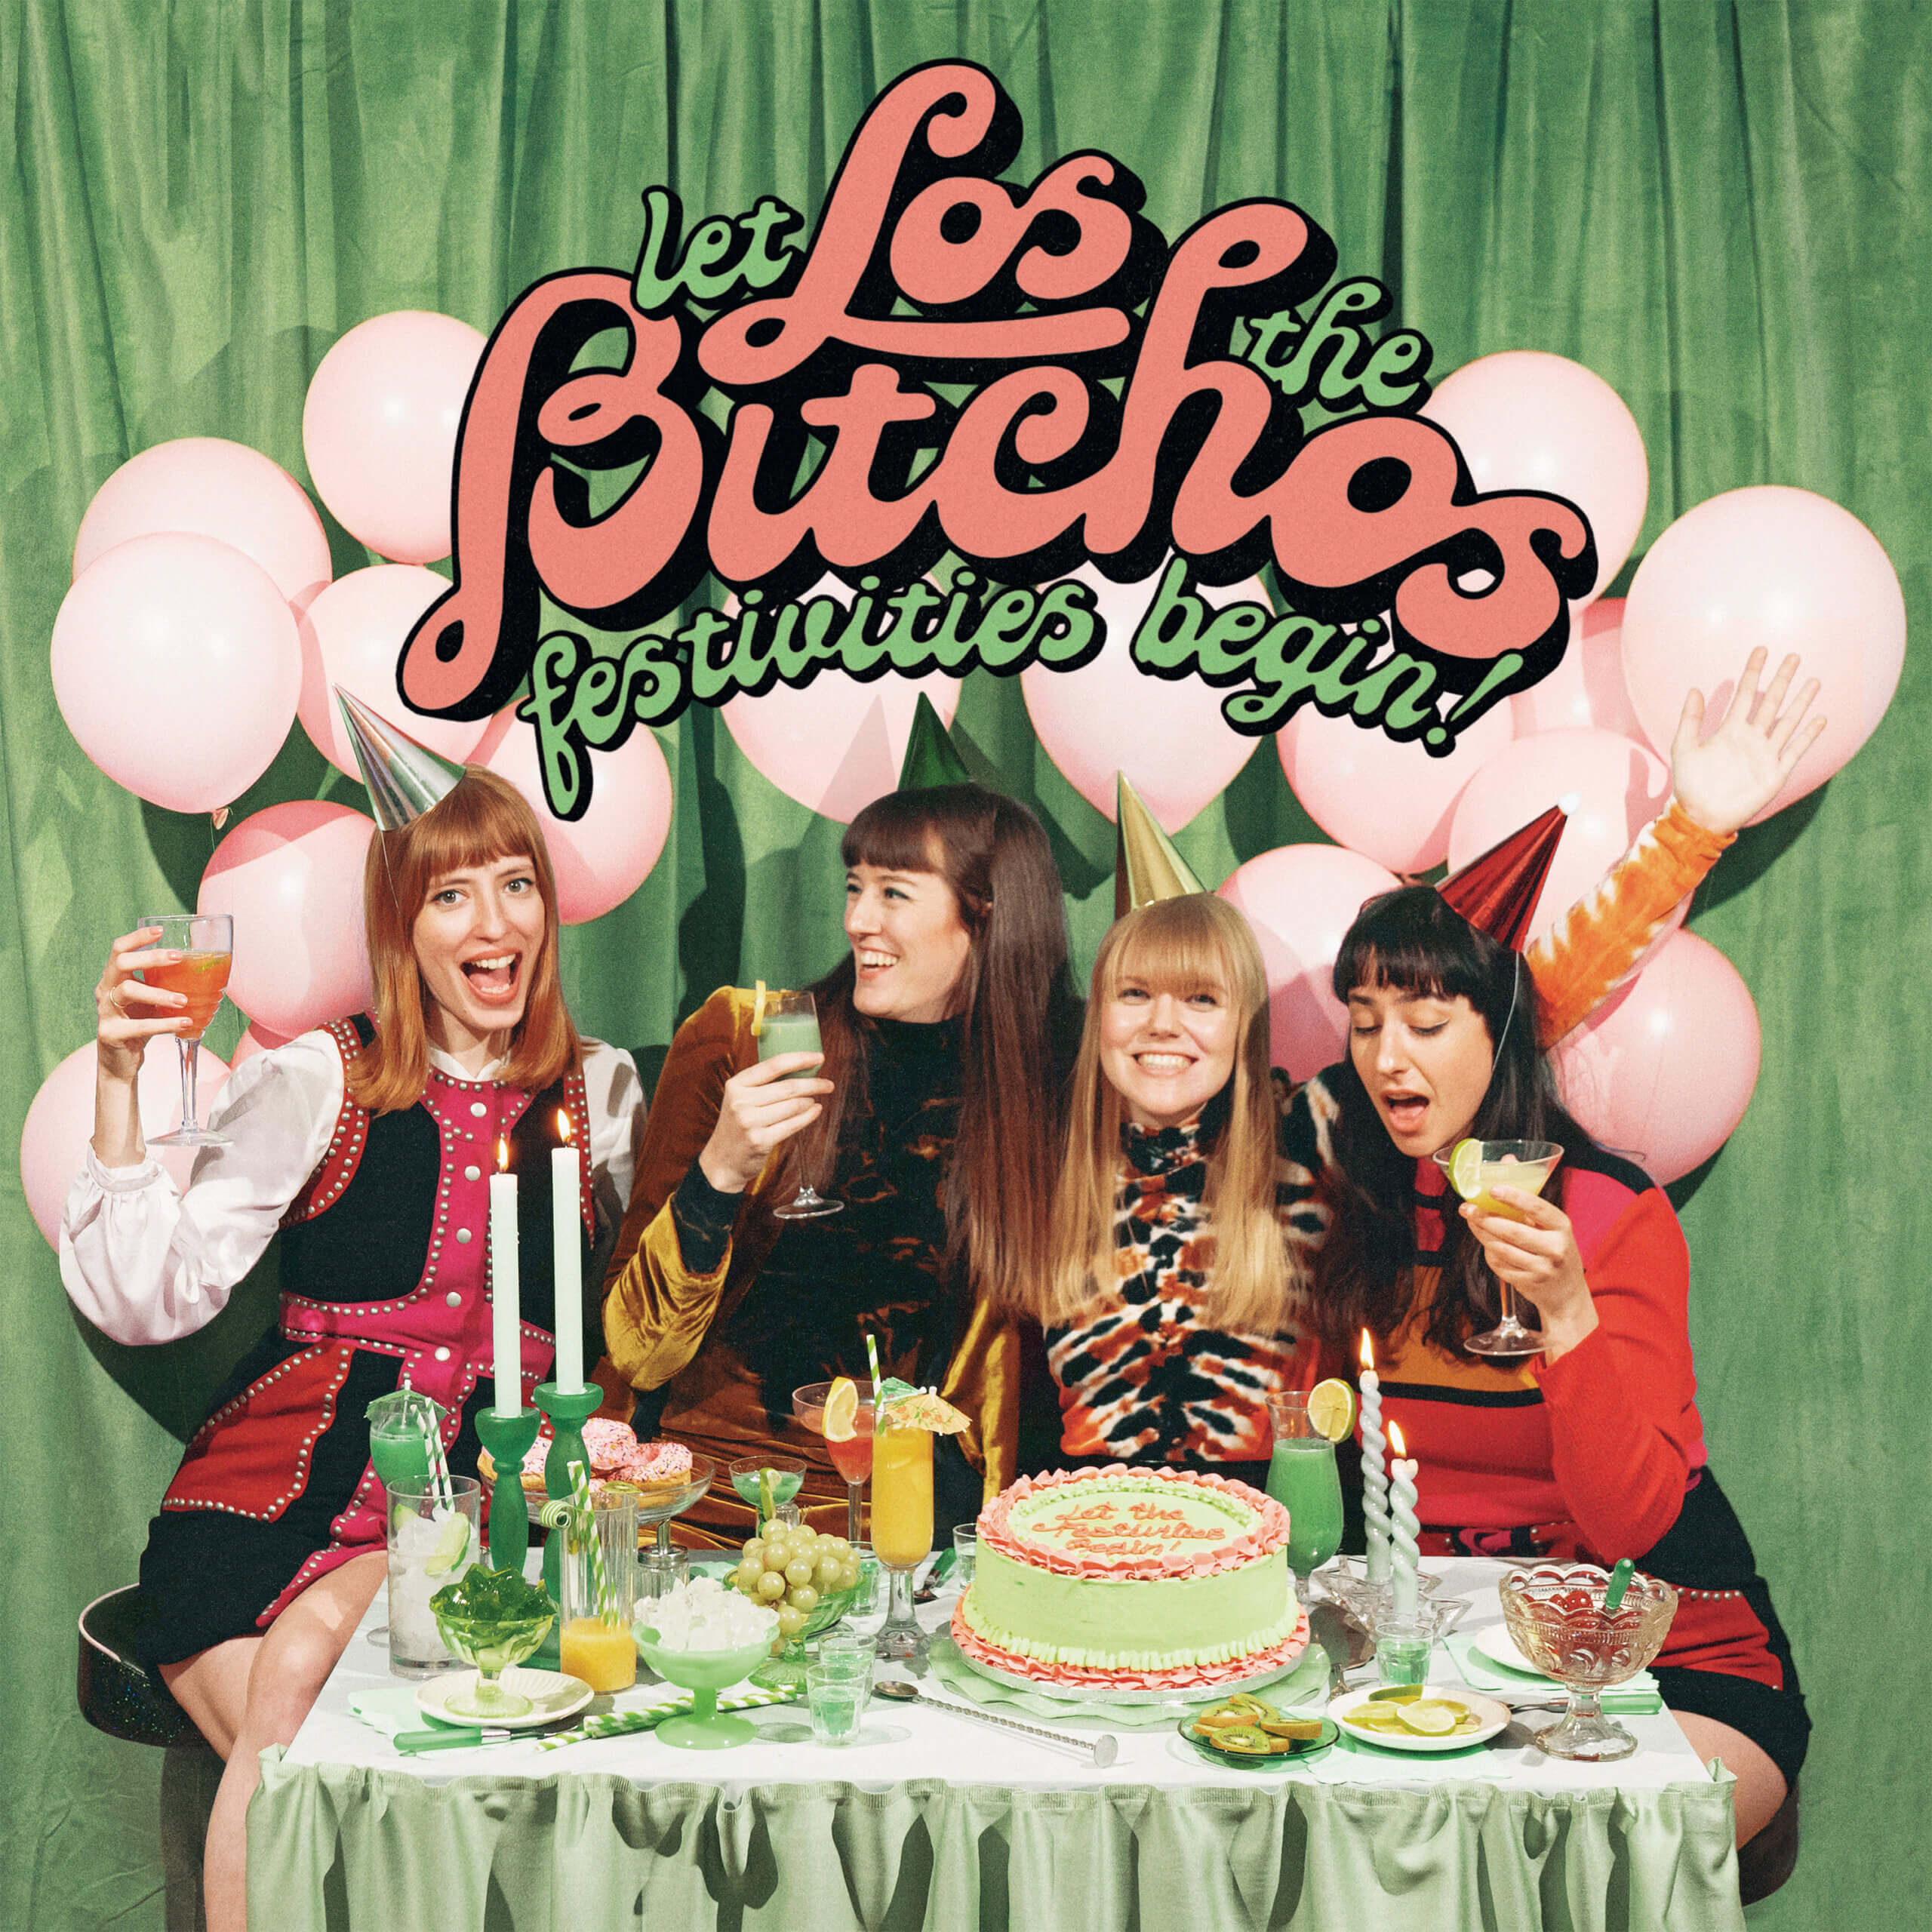 Los Bitchos 'Let The Festivities Begin!' Album Review by Adam Williams. The full-length is now available via City Slang and streaming services